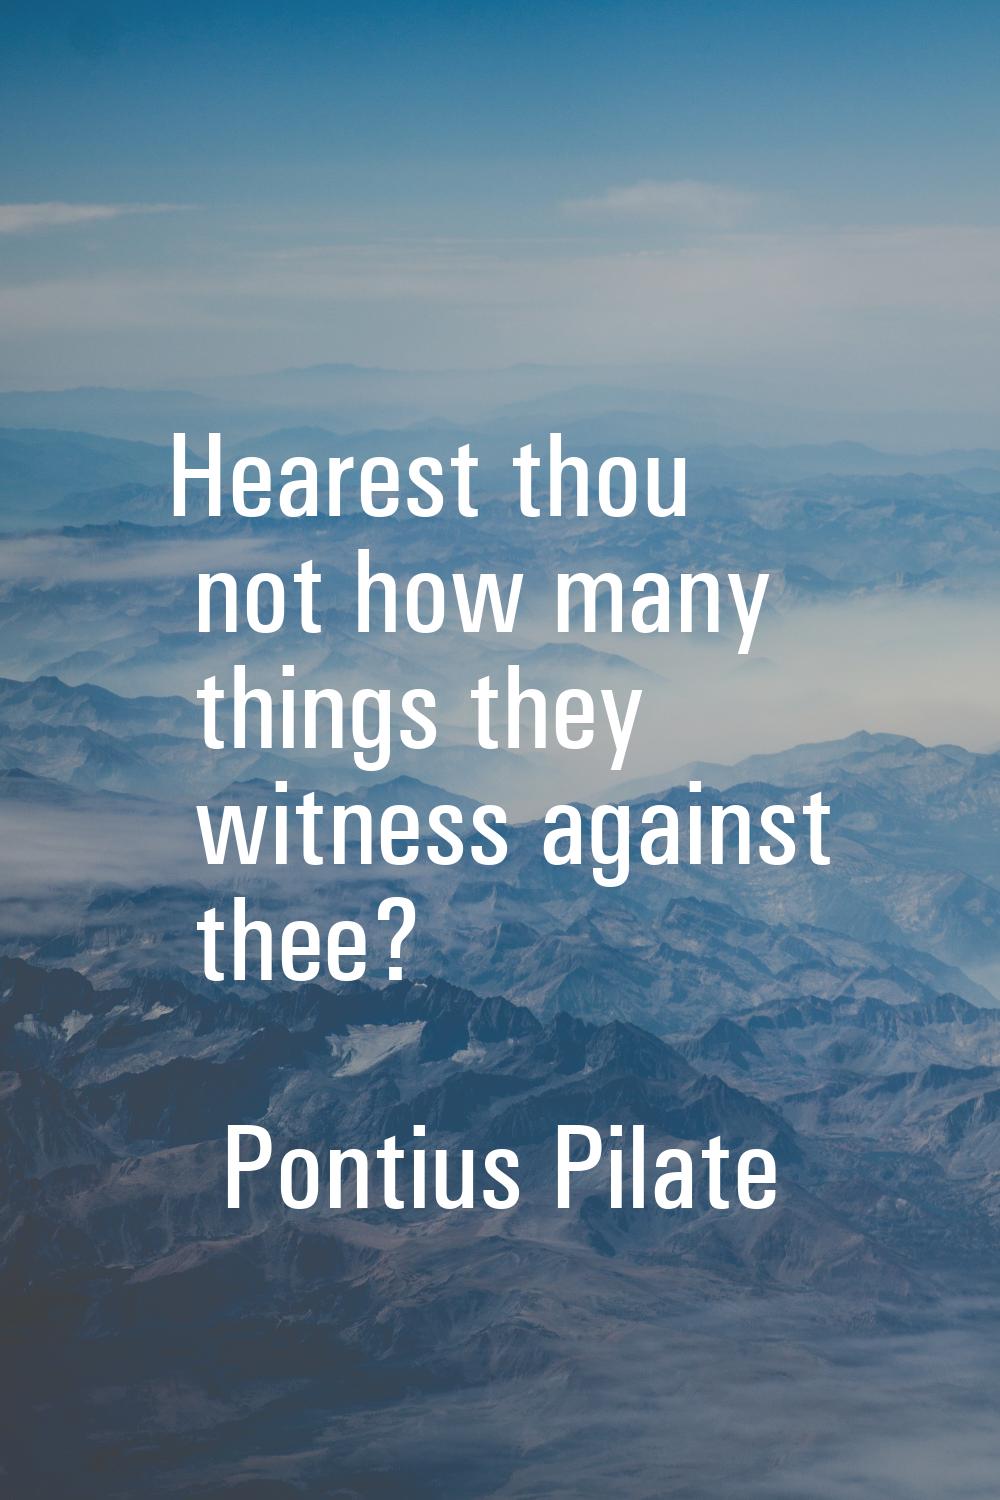 Hearest thou not how many things they witness against thee?